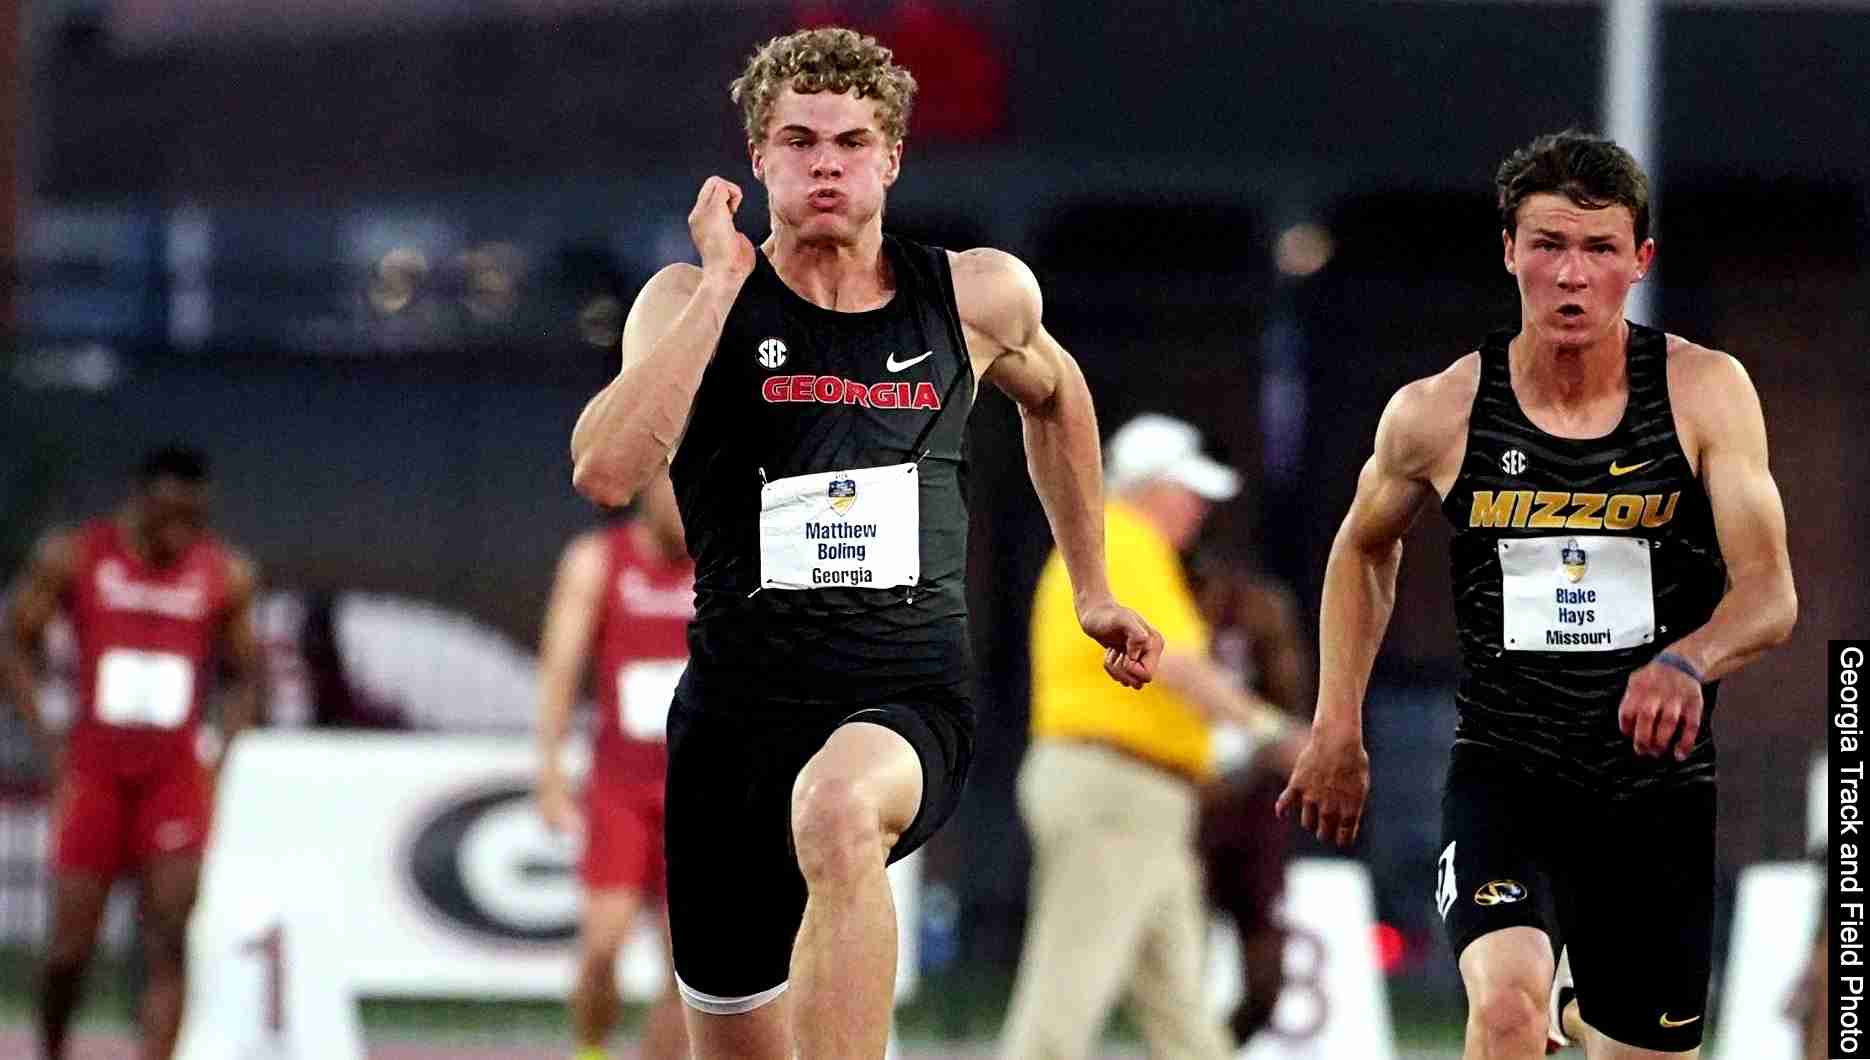 Matthew Boling targets sprint double at 2023 Spec Towns and Torrin Lawrence Invitational